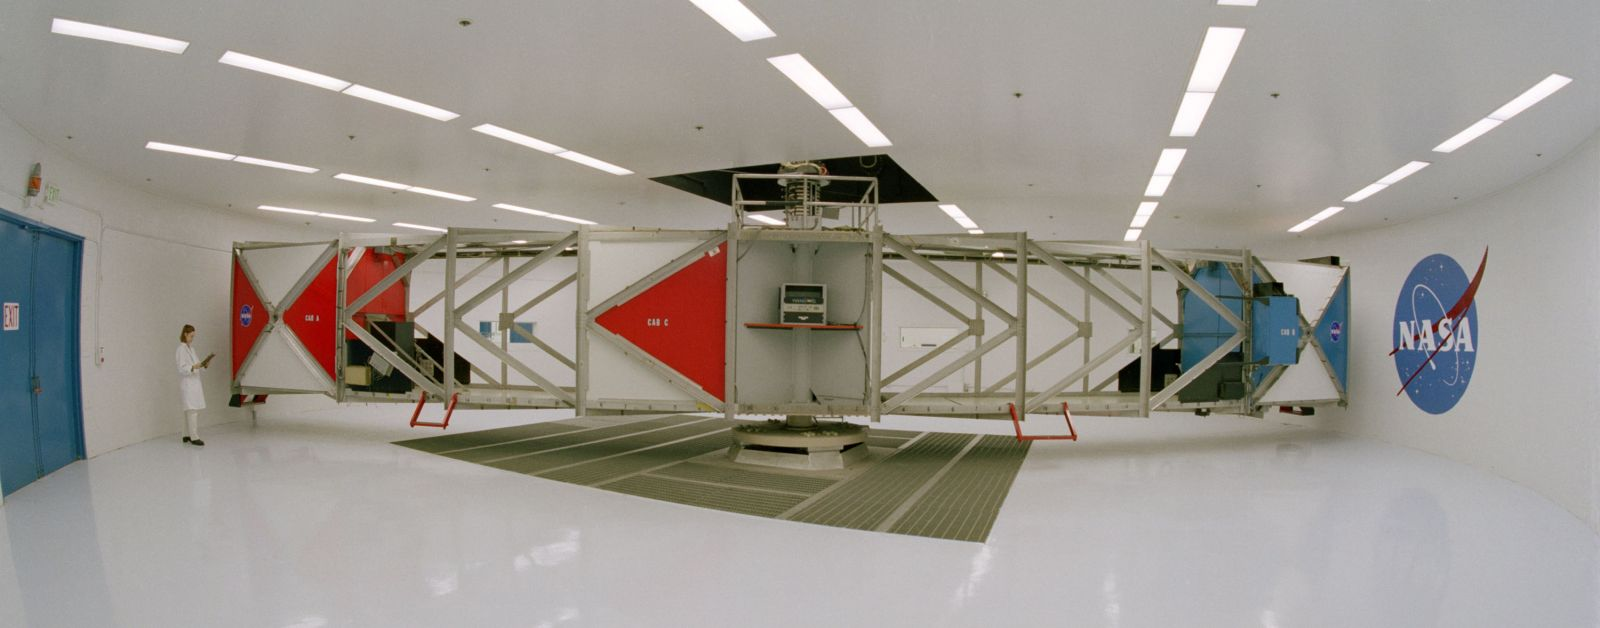 The 20G Centrifuge at the NASA Ames Research Center in Mountain View, California, has provided a research and training venue since the 1960's